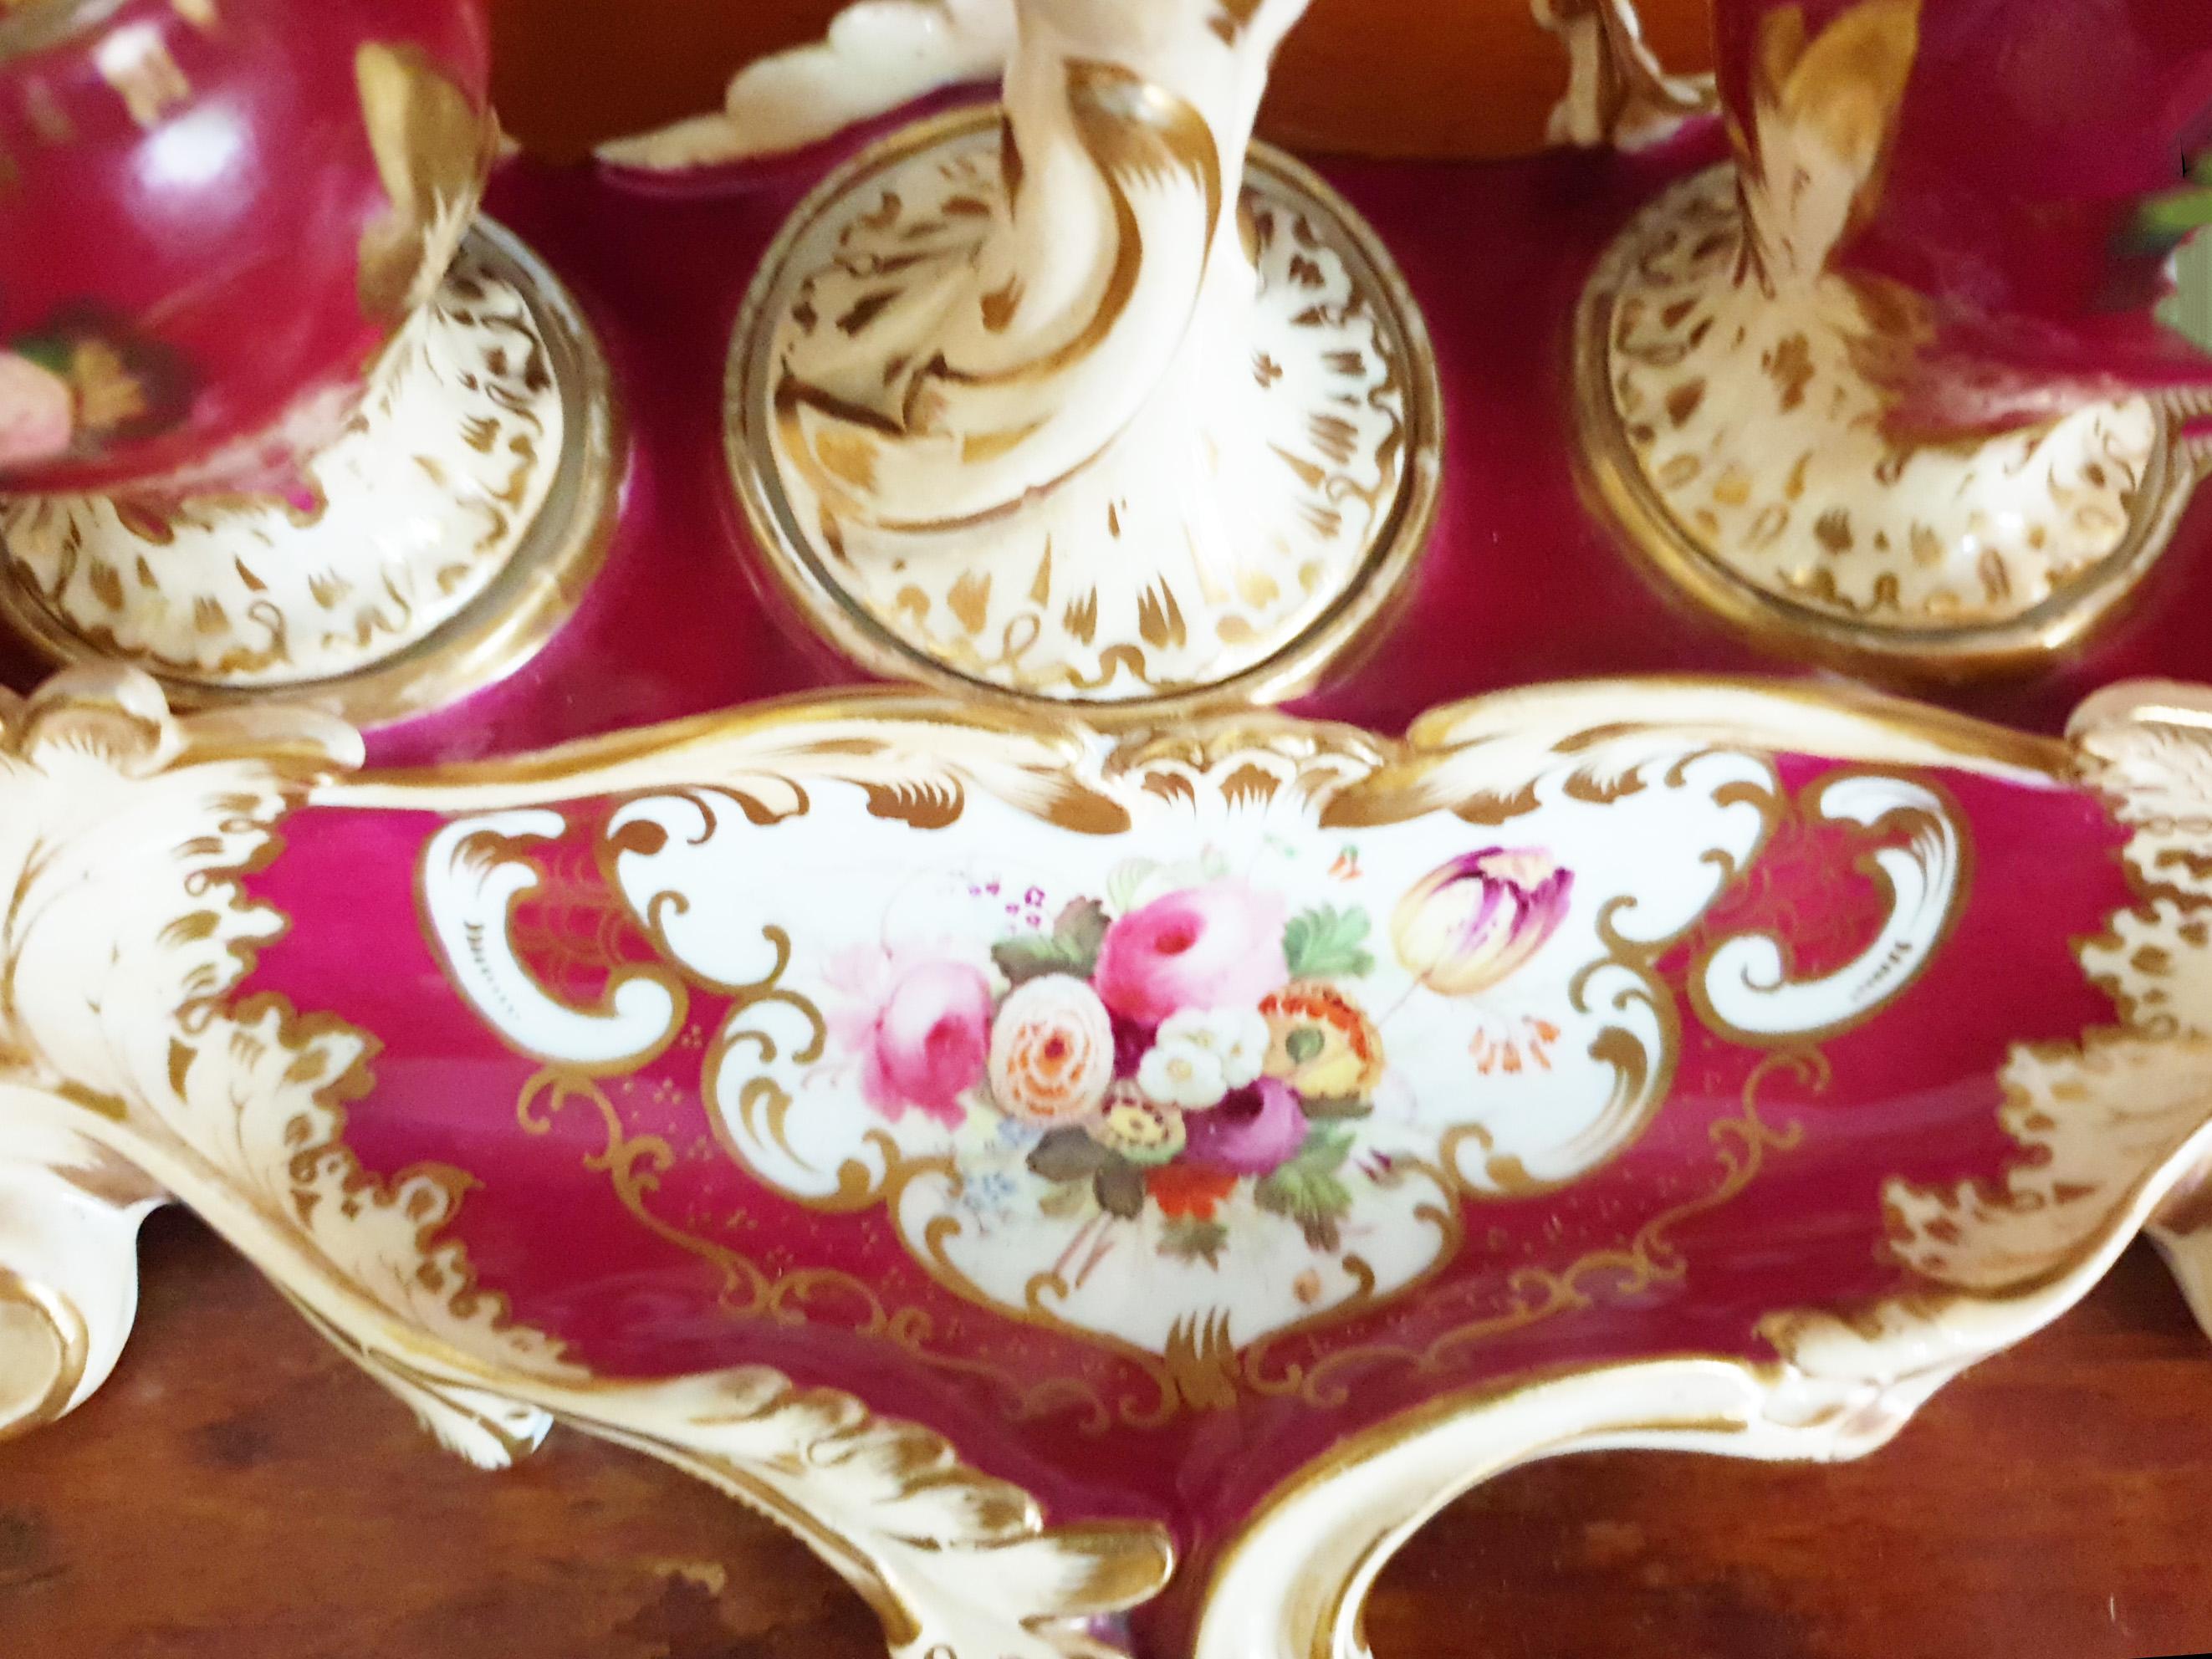 A beautiful and stunning hand painted Inkwell or Inkstand from circa 1840s from the Minton factory. It consists of four parts: the main body, two round lidded compartments and a candlestick to the middle. This Inkwell is painted in ruby red and